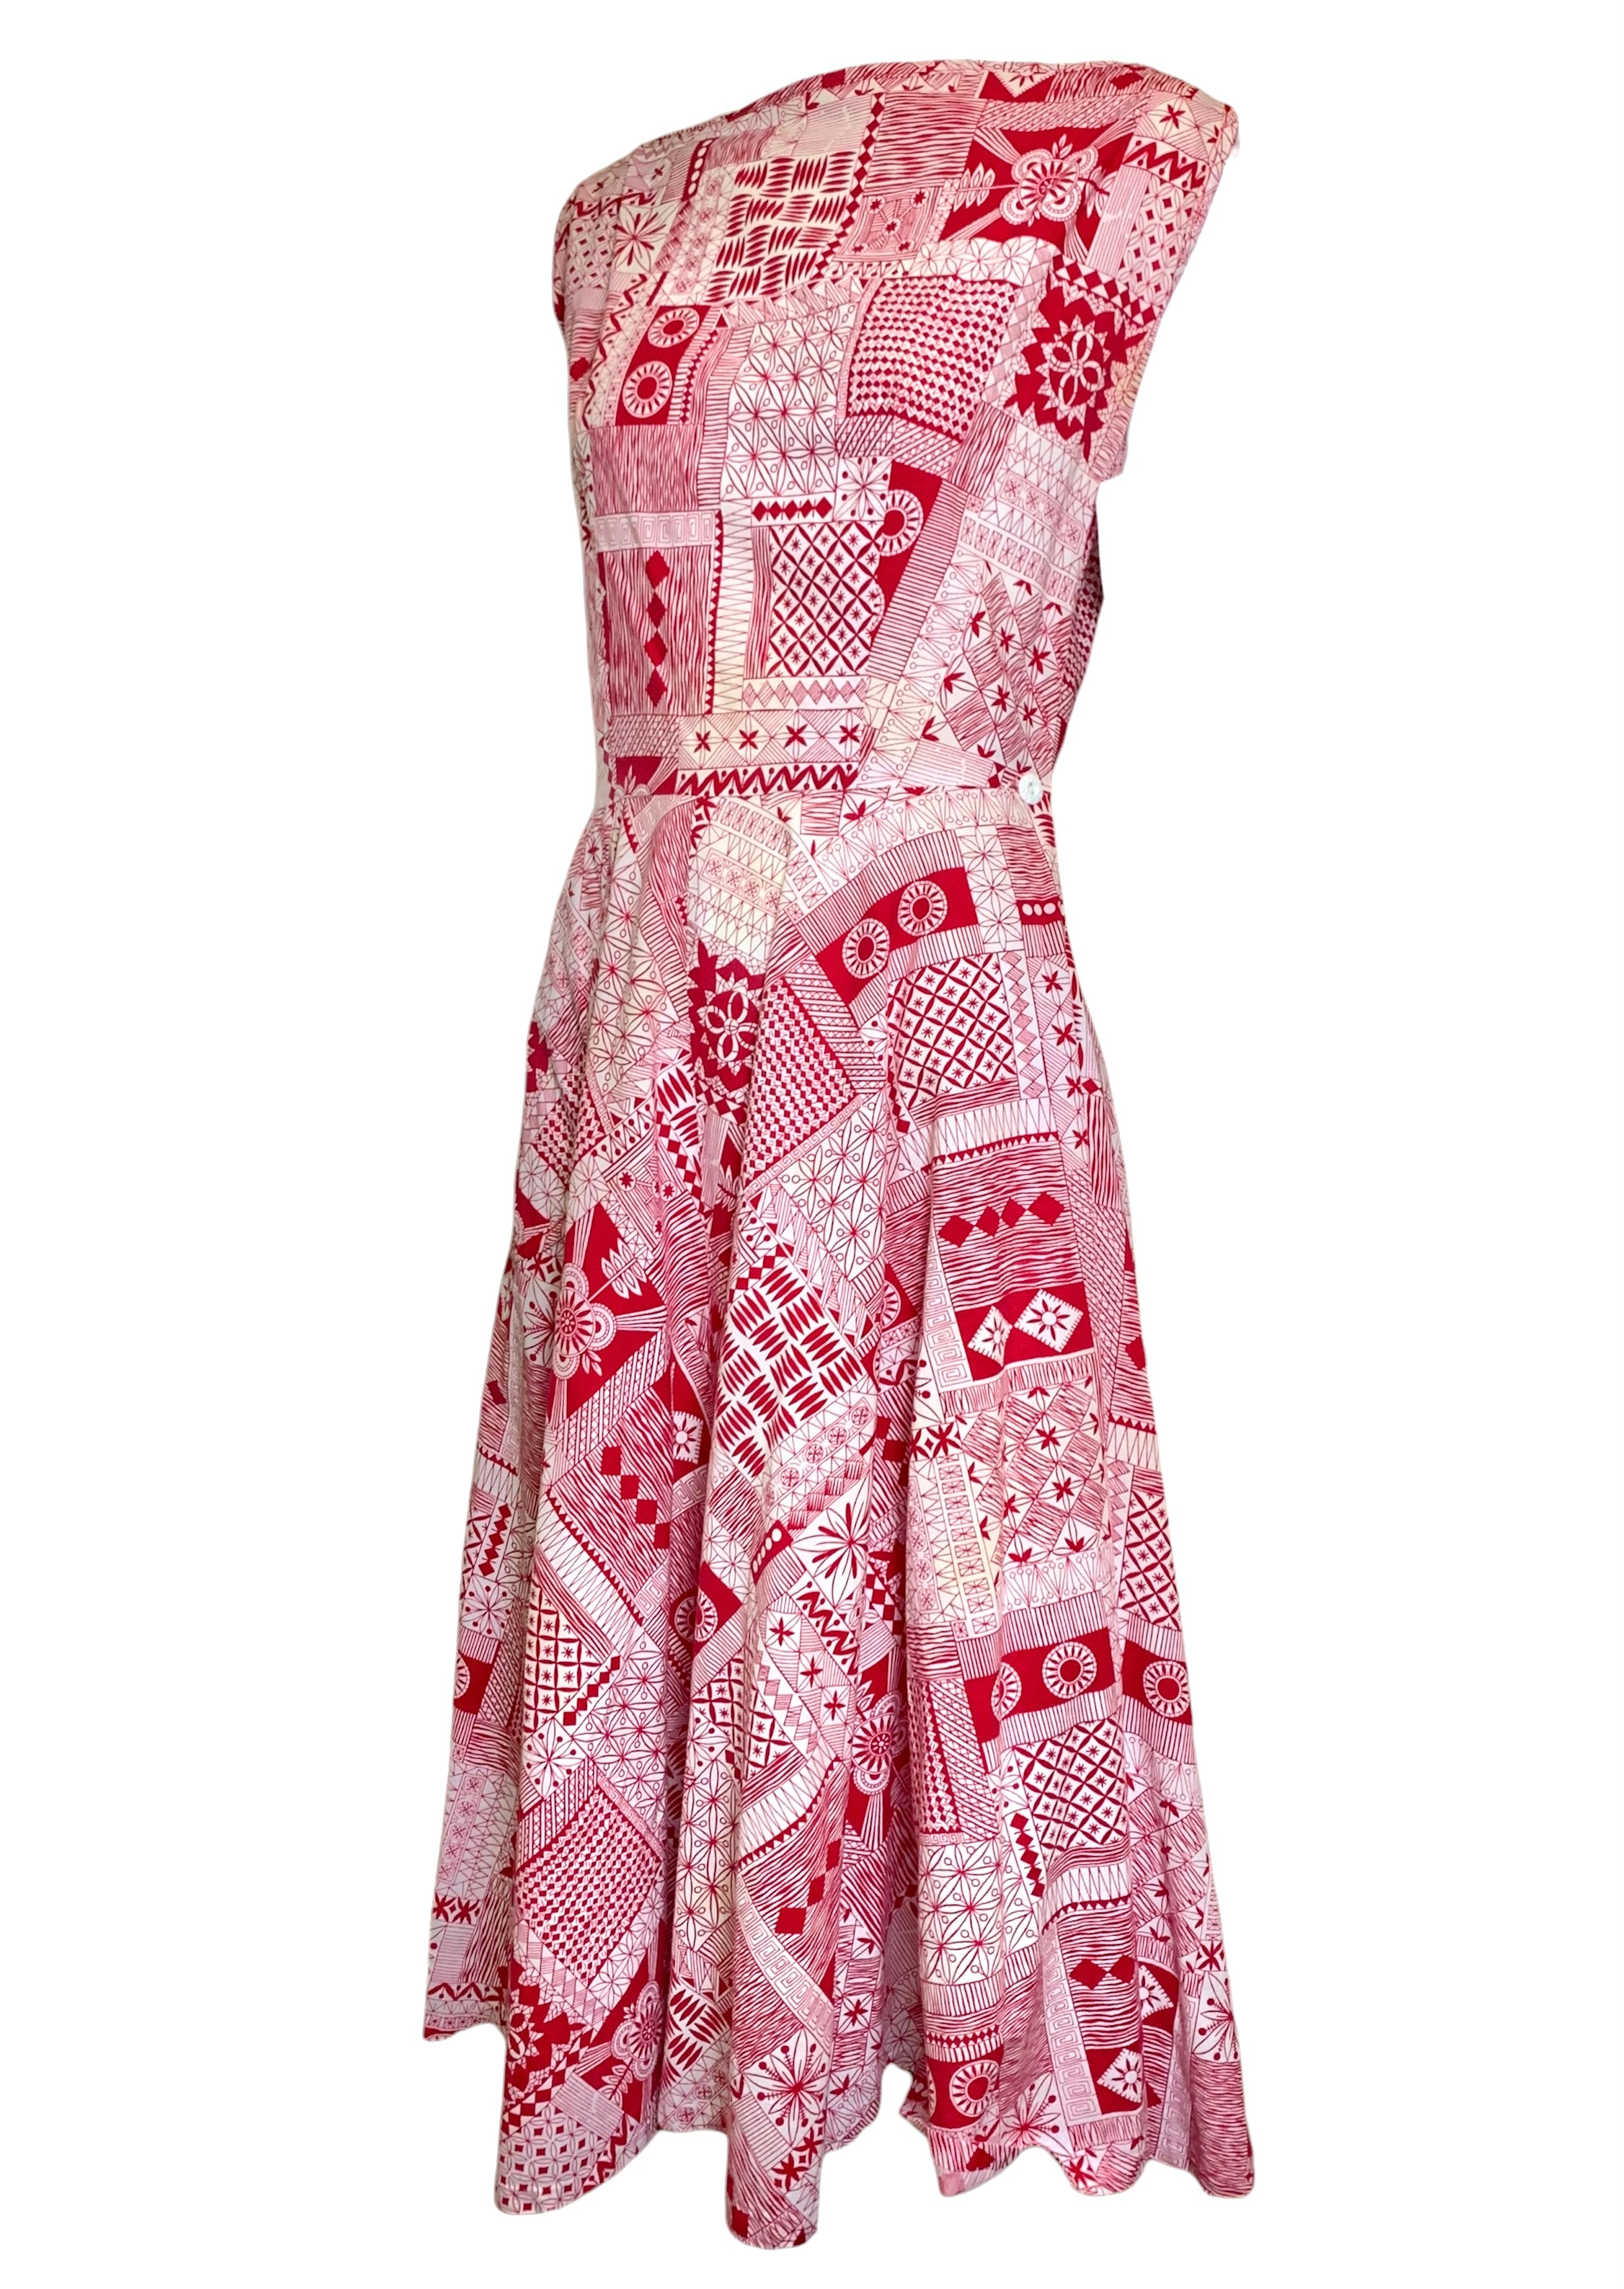 Dixie Lou Frock '50s Red Block Print Day Dress SIDE